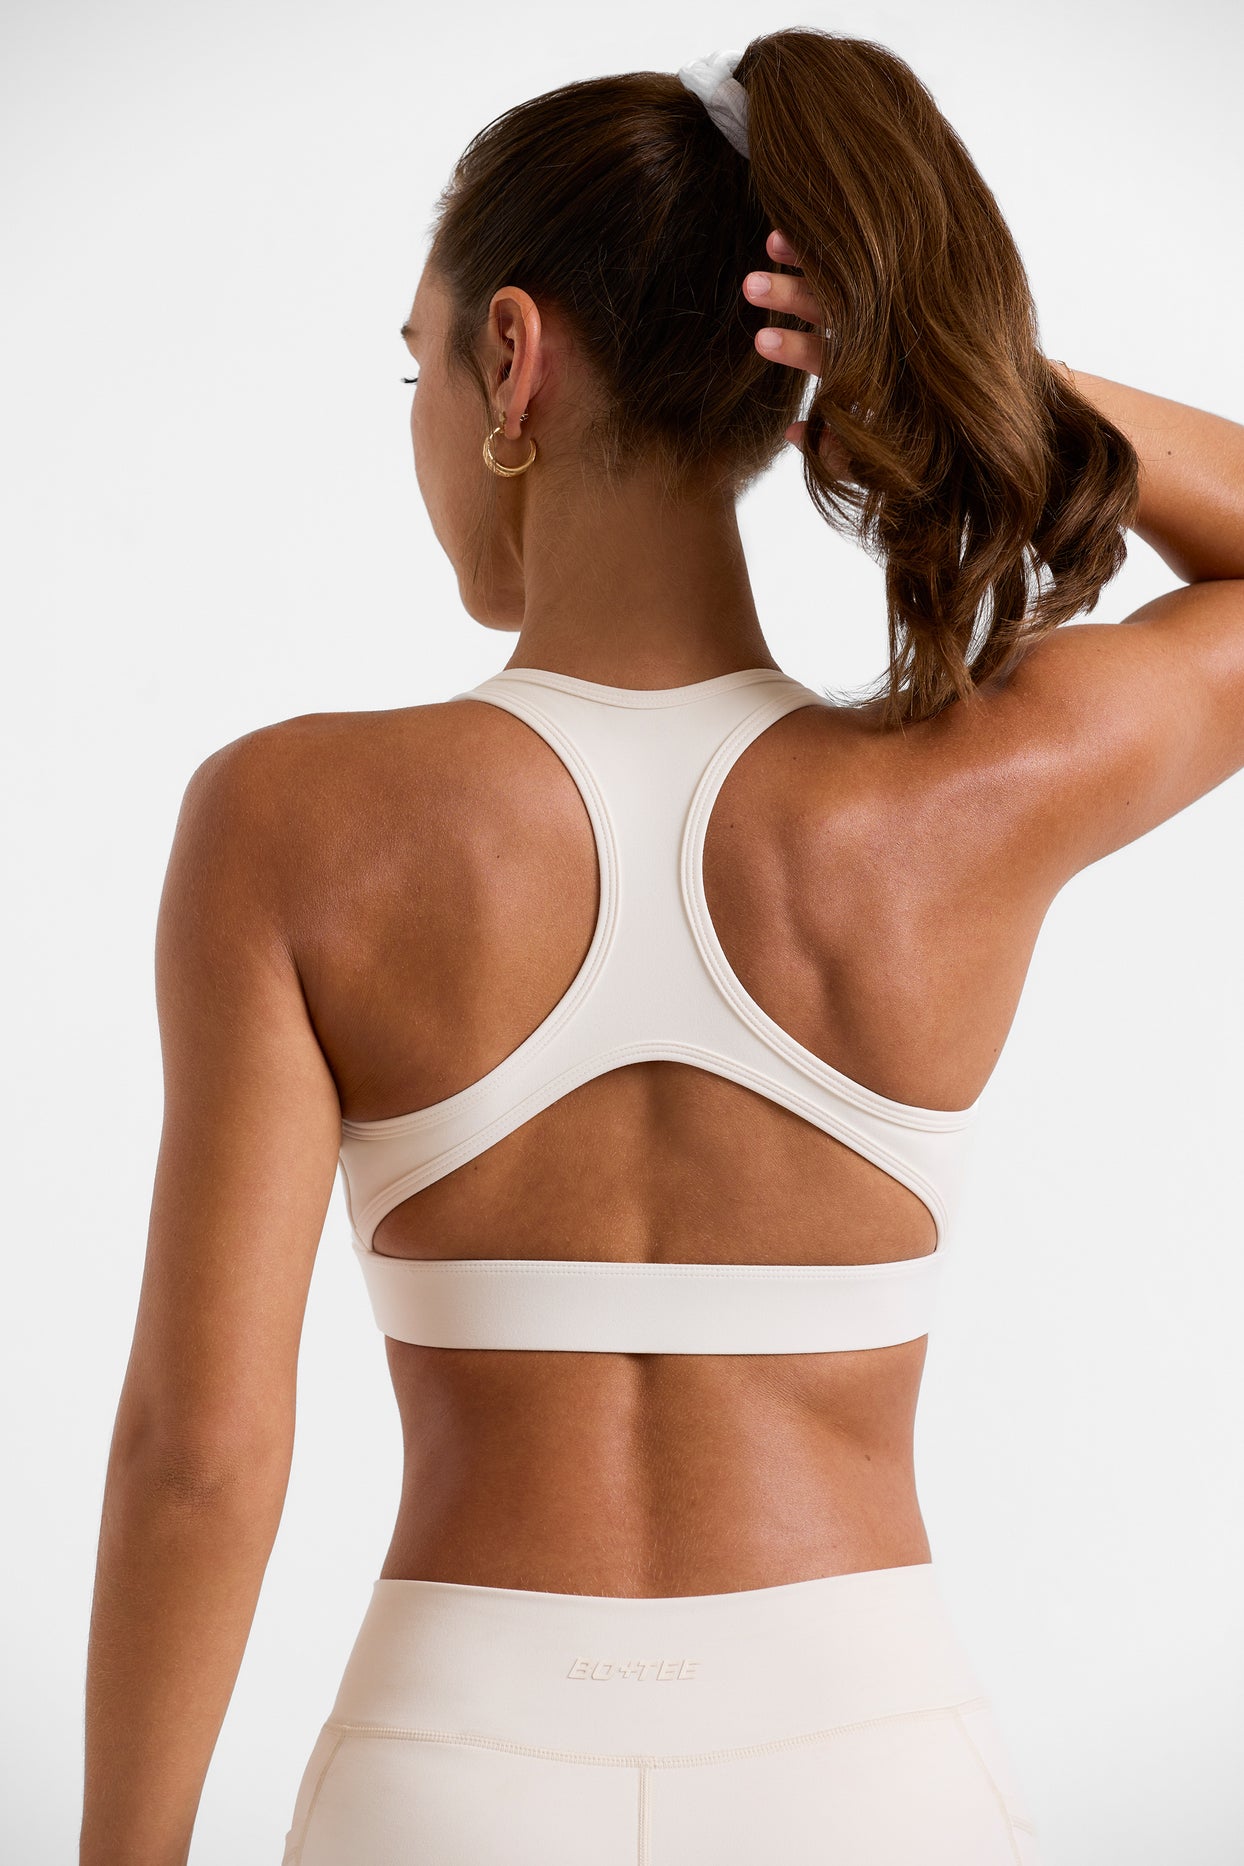 Oh Polly white halter backless sports bra Size XXS - $37 New With